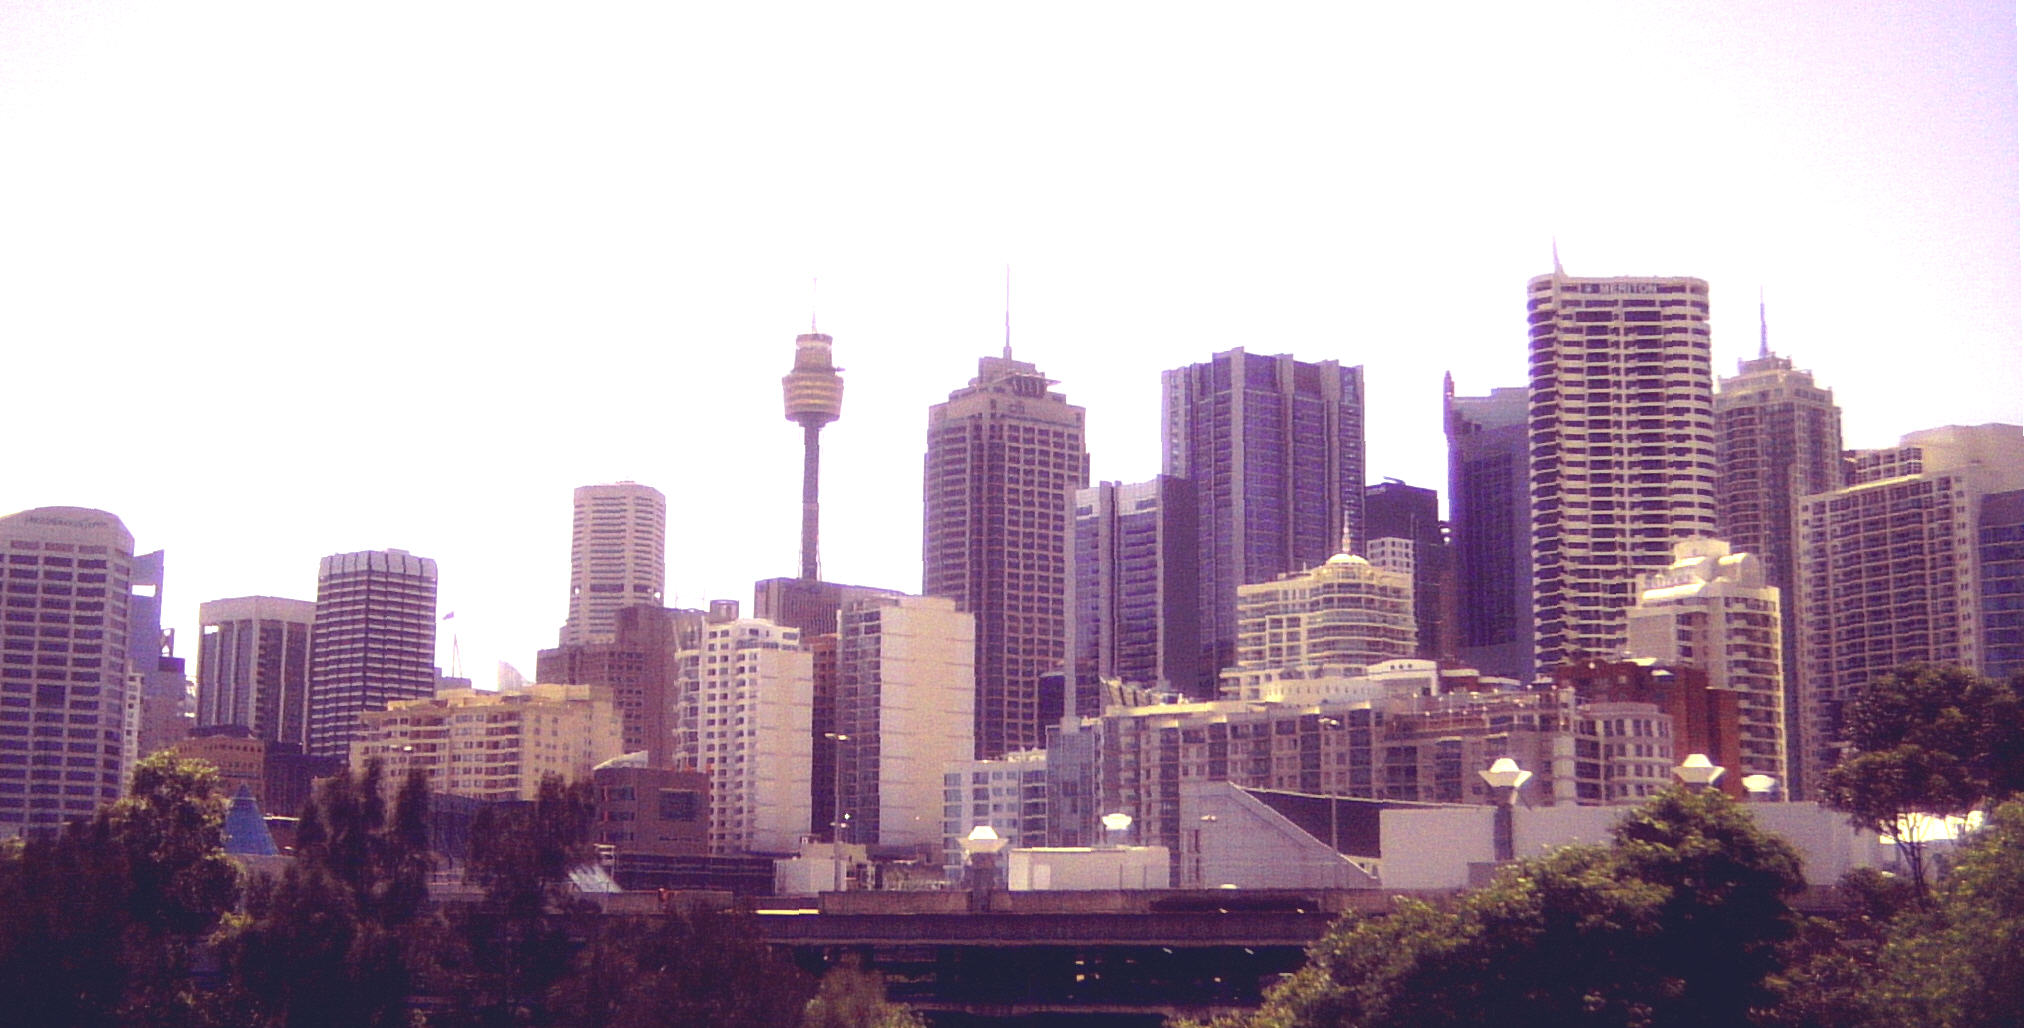 File:Sydney City Skyline from Chinatown.jpg - Wikipedia, the free ...